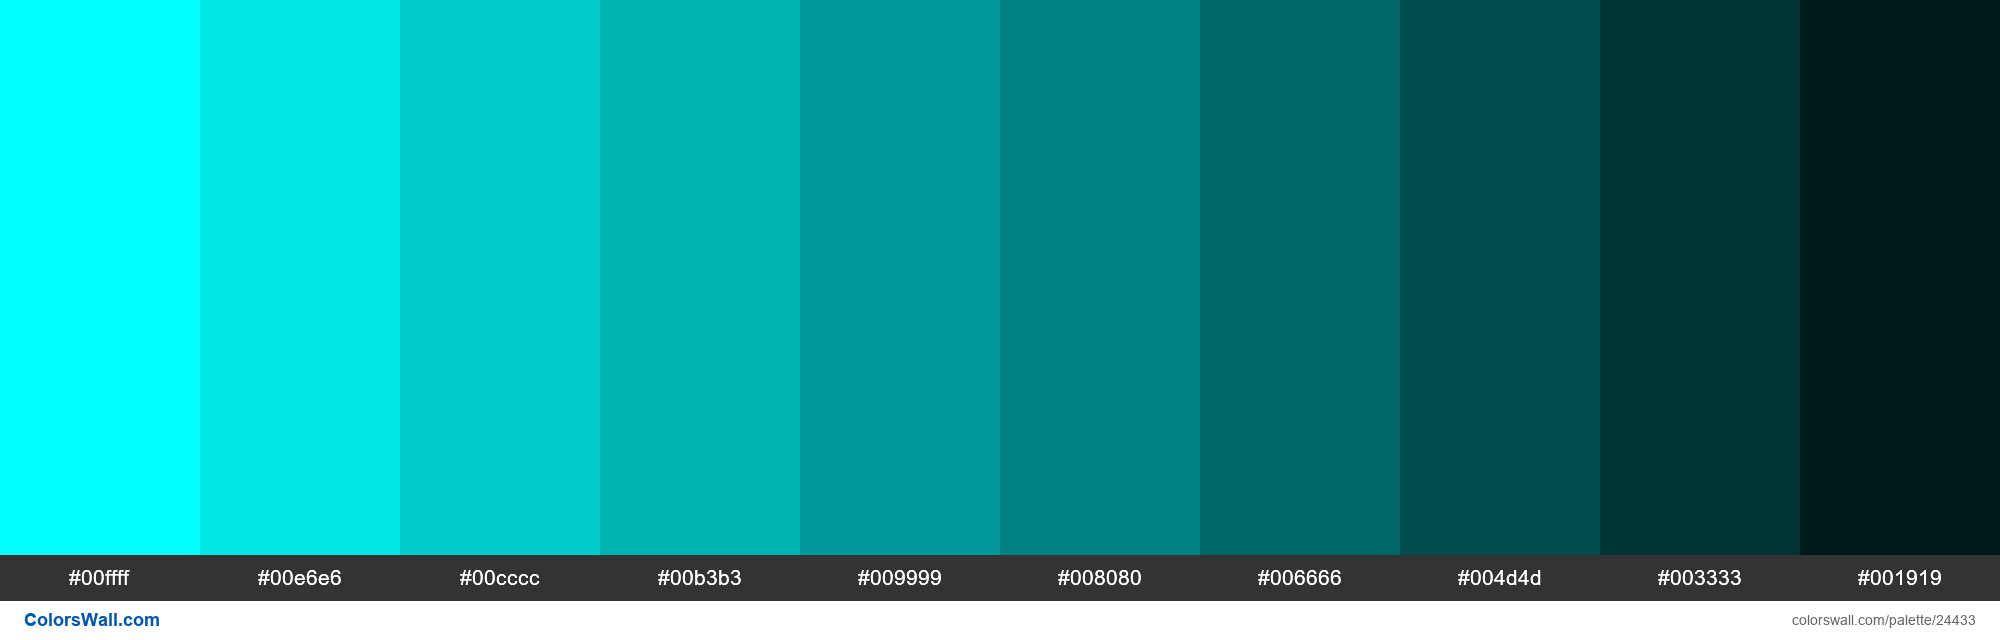 Shades of Cyan #00FFFF hex color - ColorsWall